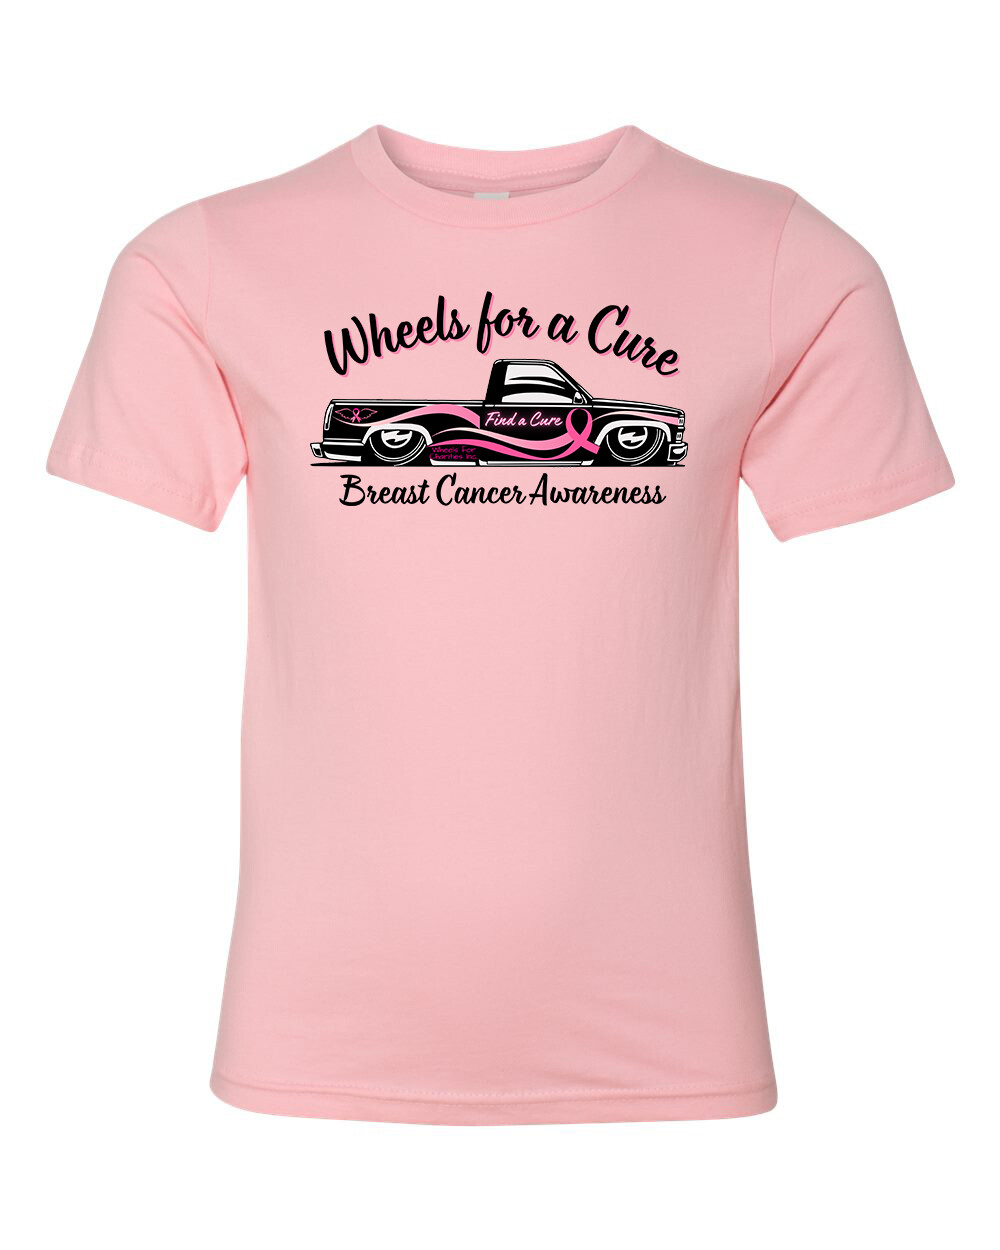 Wheels for a Cure T-shirts